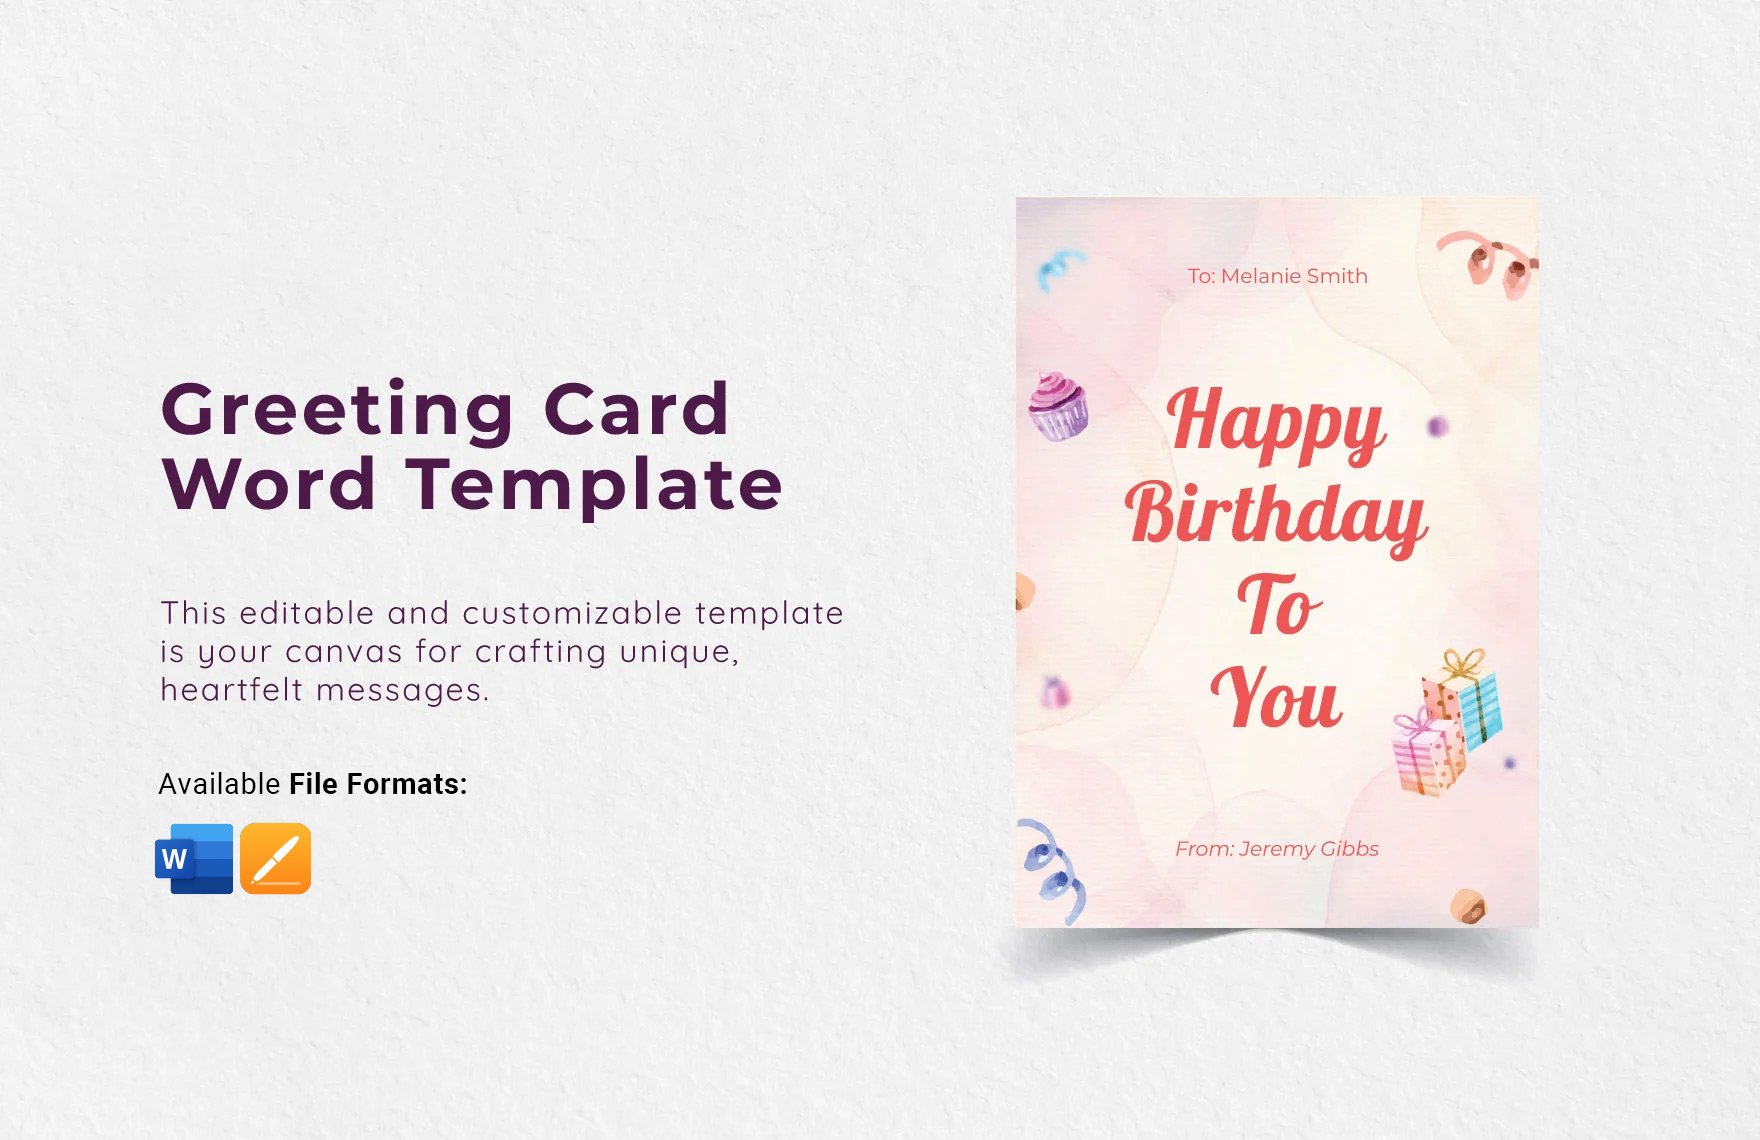 Free Greeting Card Word Template in Word, Apple Pages